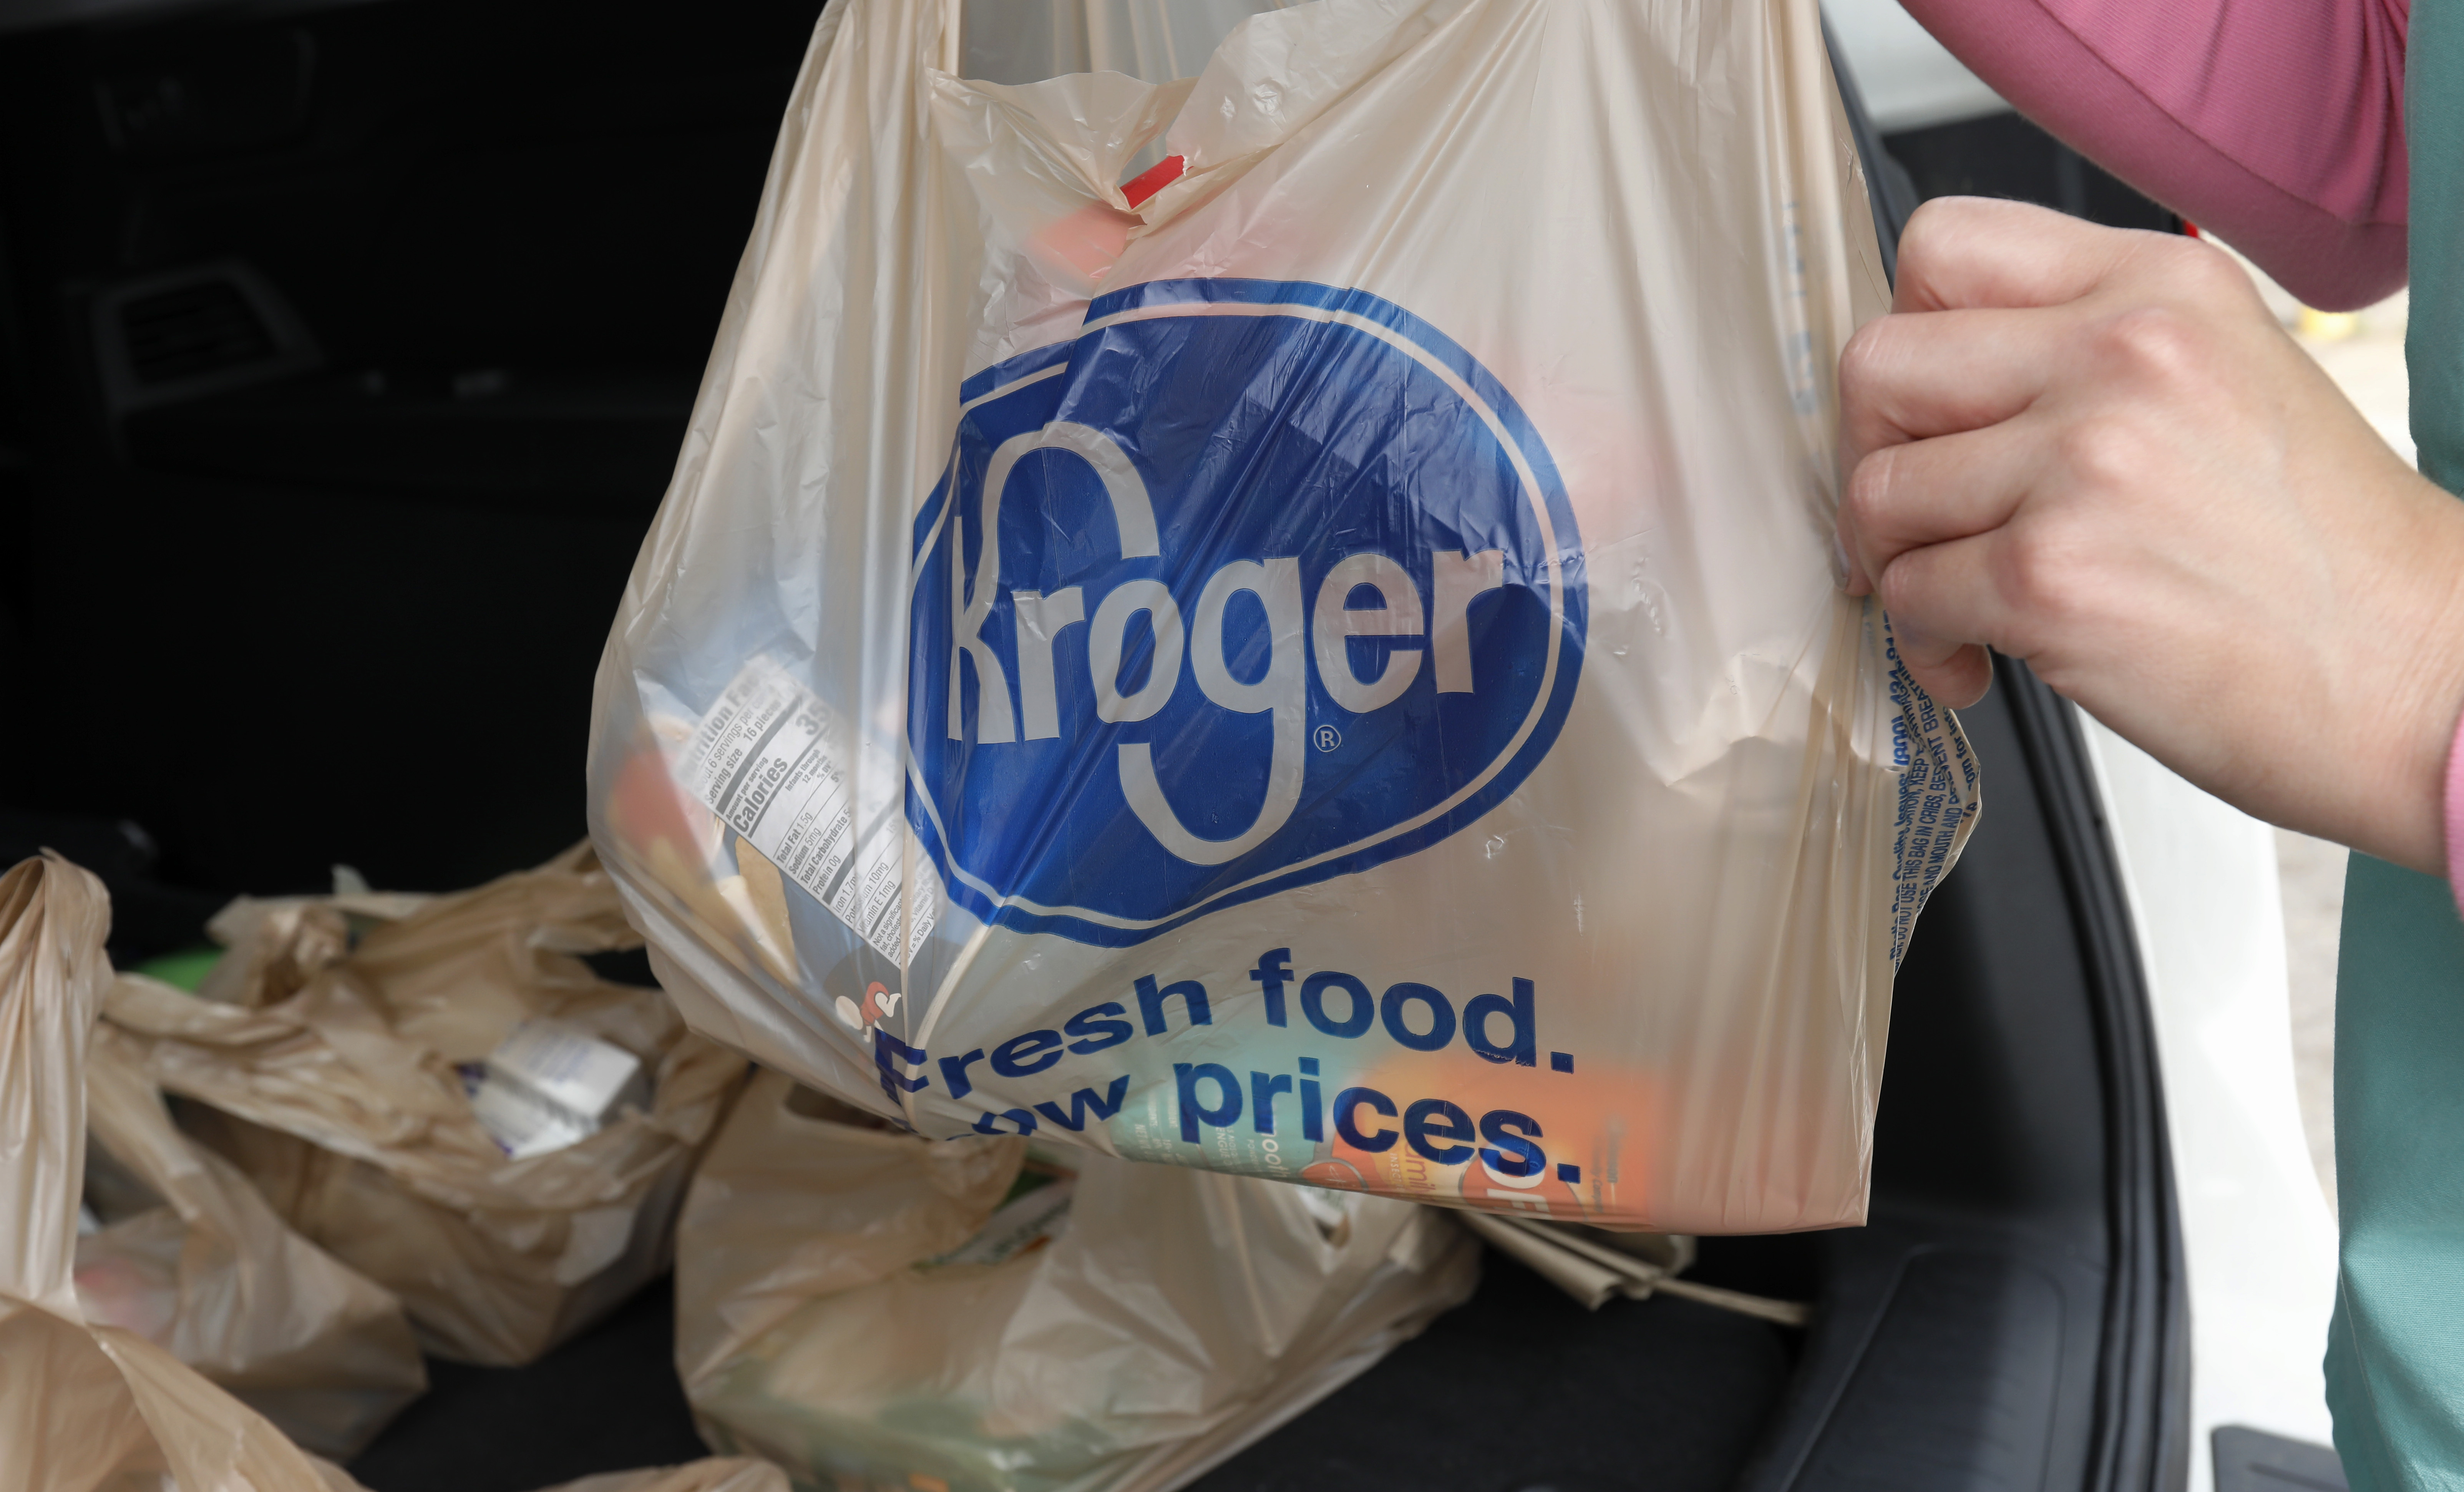 FTC’s suit against Kroger-Albertsons merger will have a ‘chilling effect’ on M&A activity